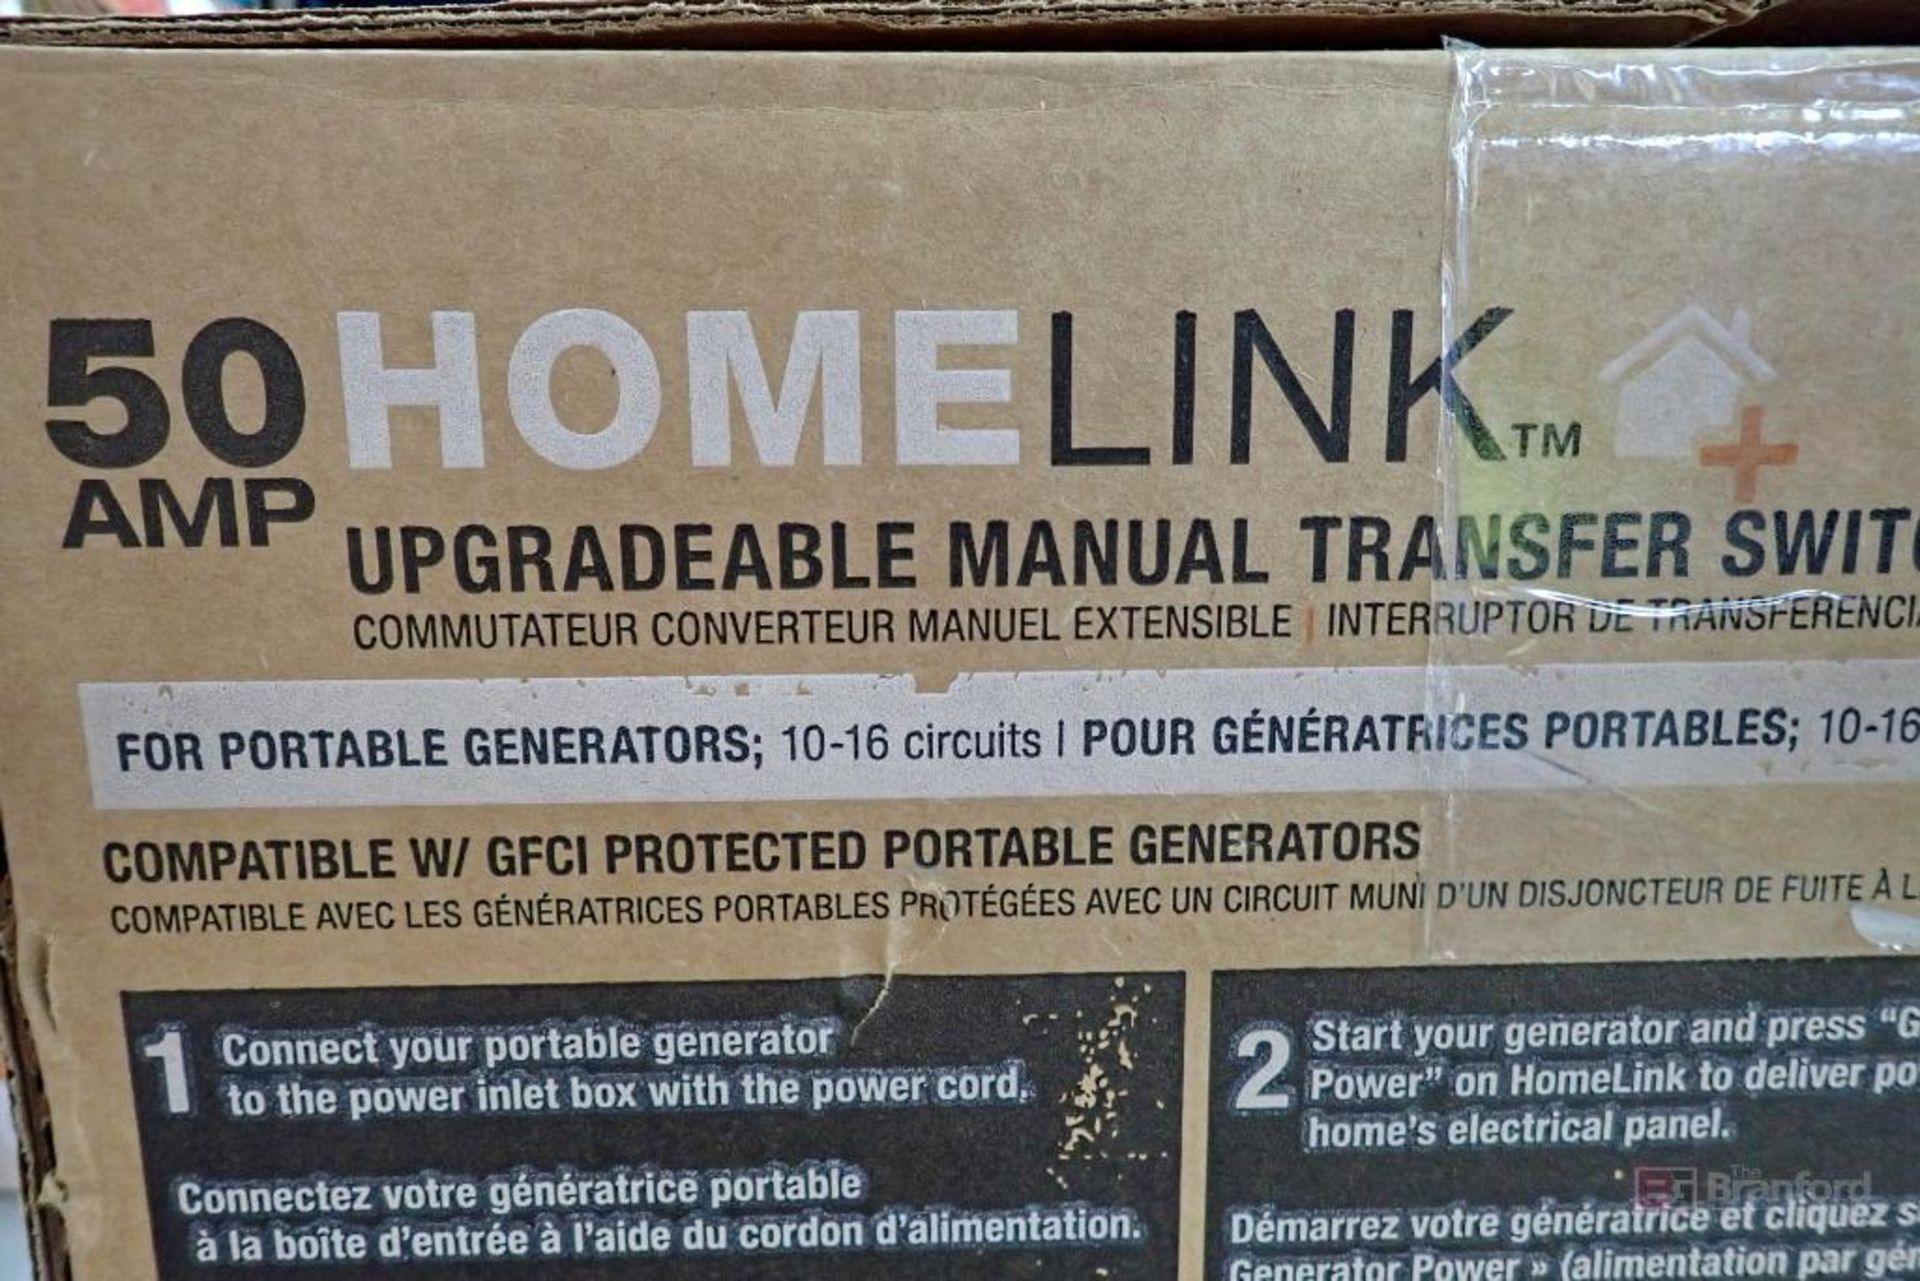 GENERAC GNR98550 HomeLink 50 AMP Upgradeable Manual Transfer Switch - Image 2 of 5